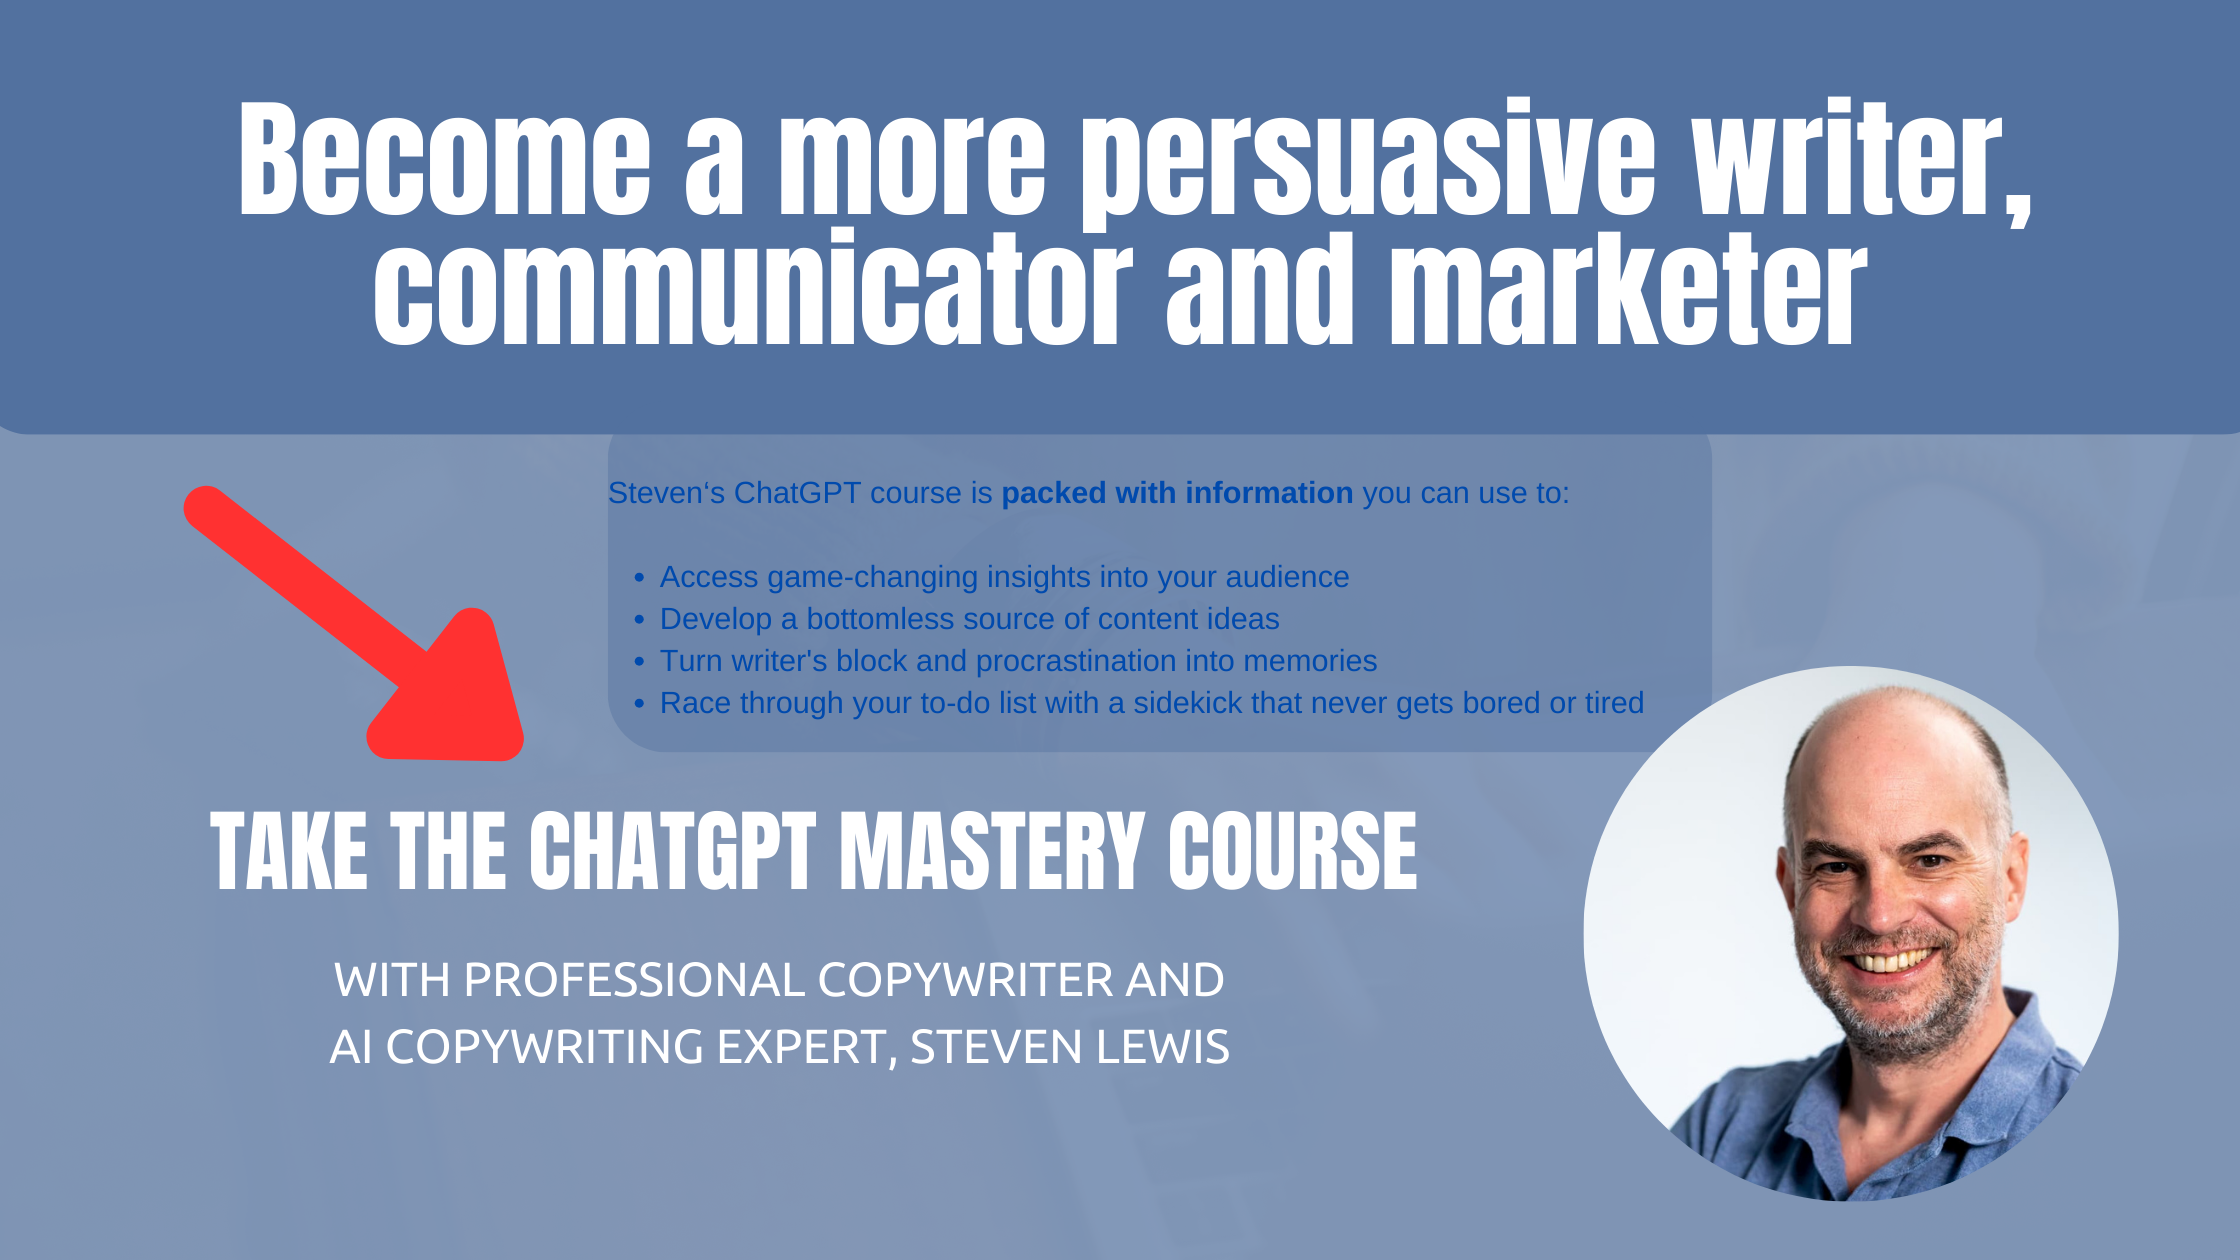 Image shows Steven Lewis in a blue polo neck shirt and the text says "become a more persuasive writer, communicator and marketer.  Take the ChatGPT Mastery course with professional copywriter and AI copywriting expert, Steven Lewis